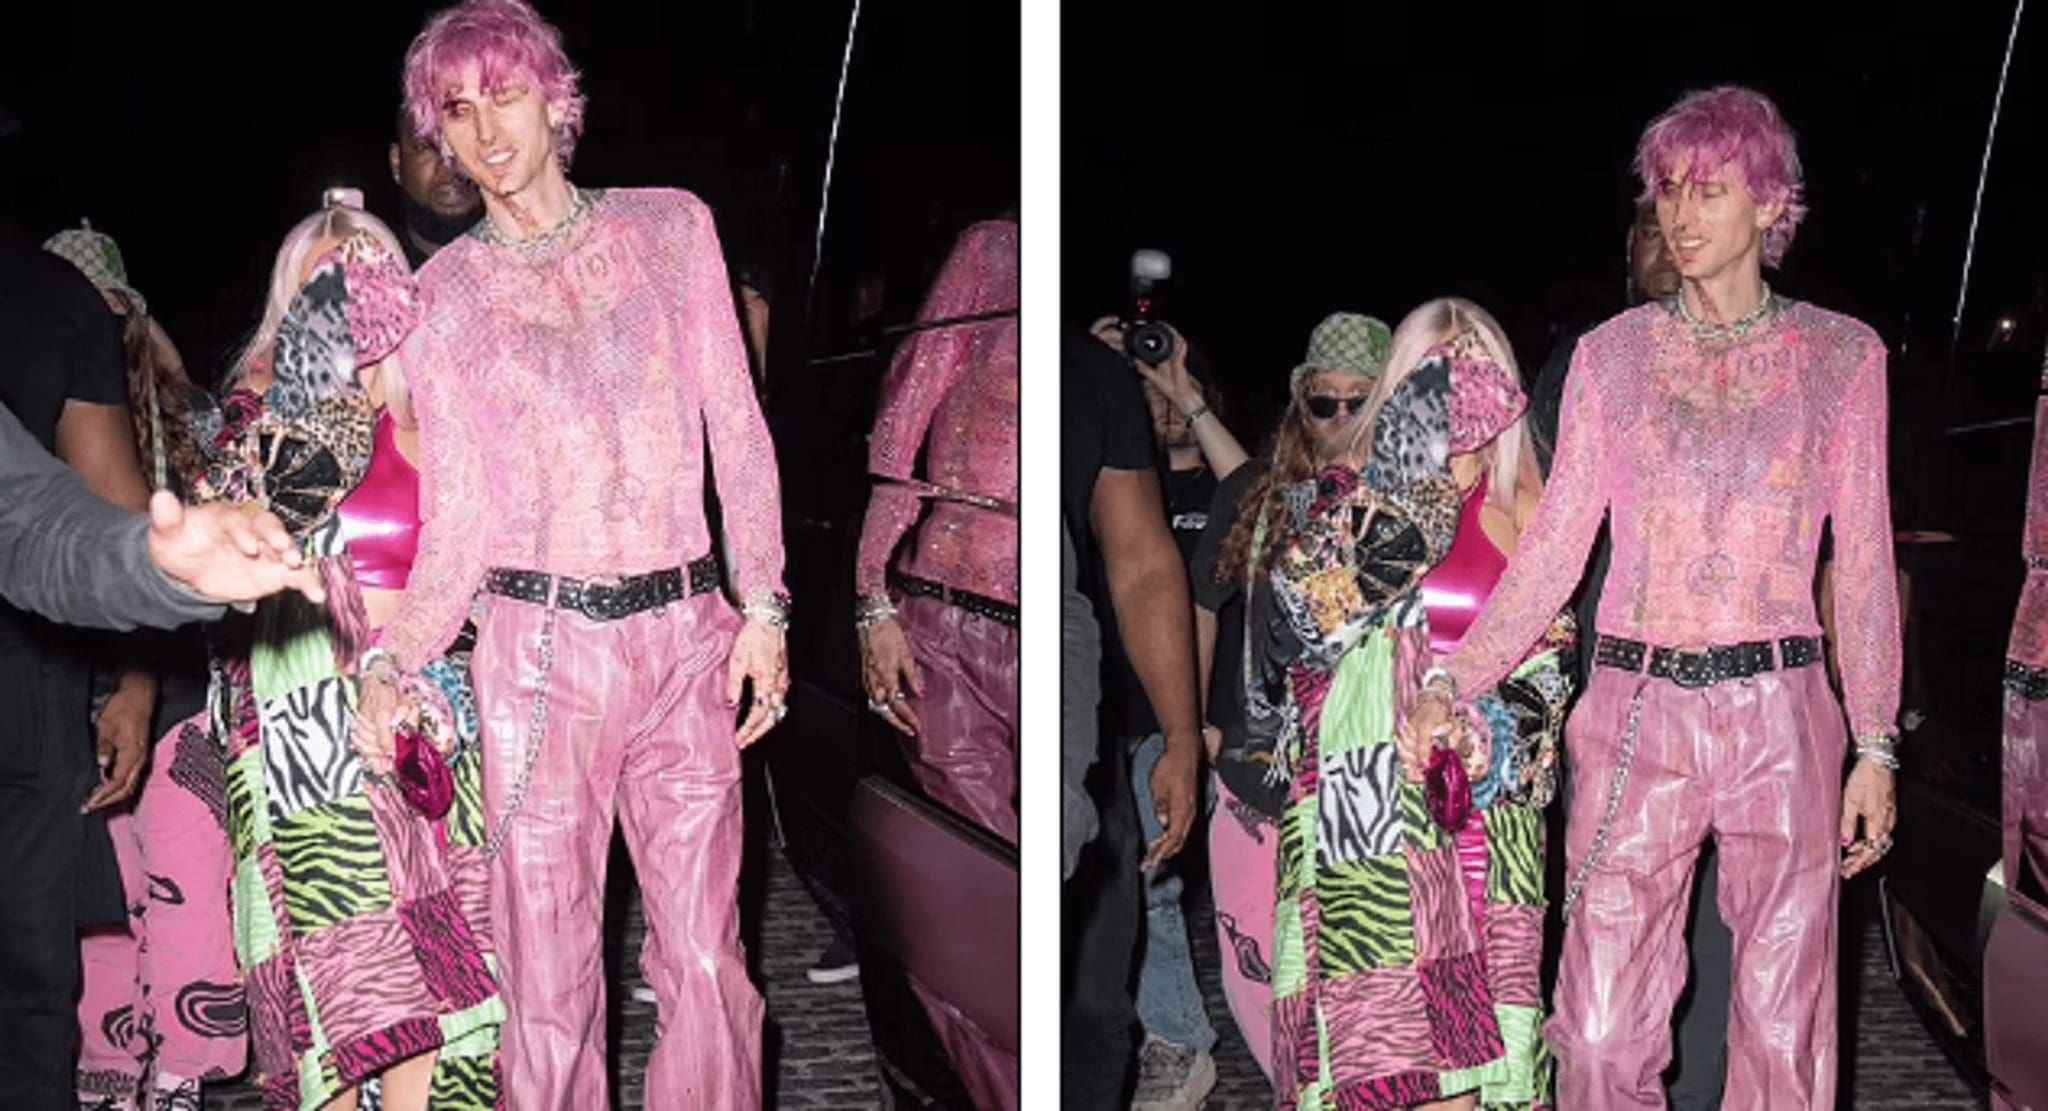 Machine Gun Kelly left the party covered in blood